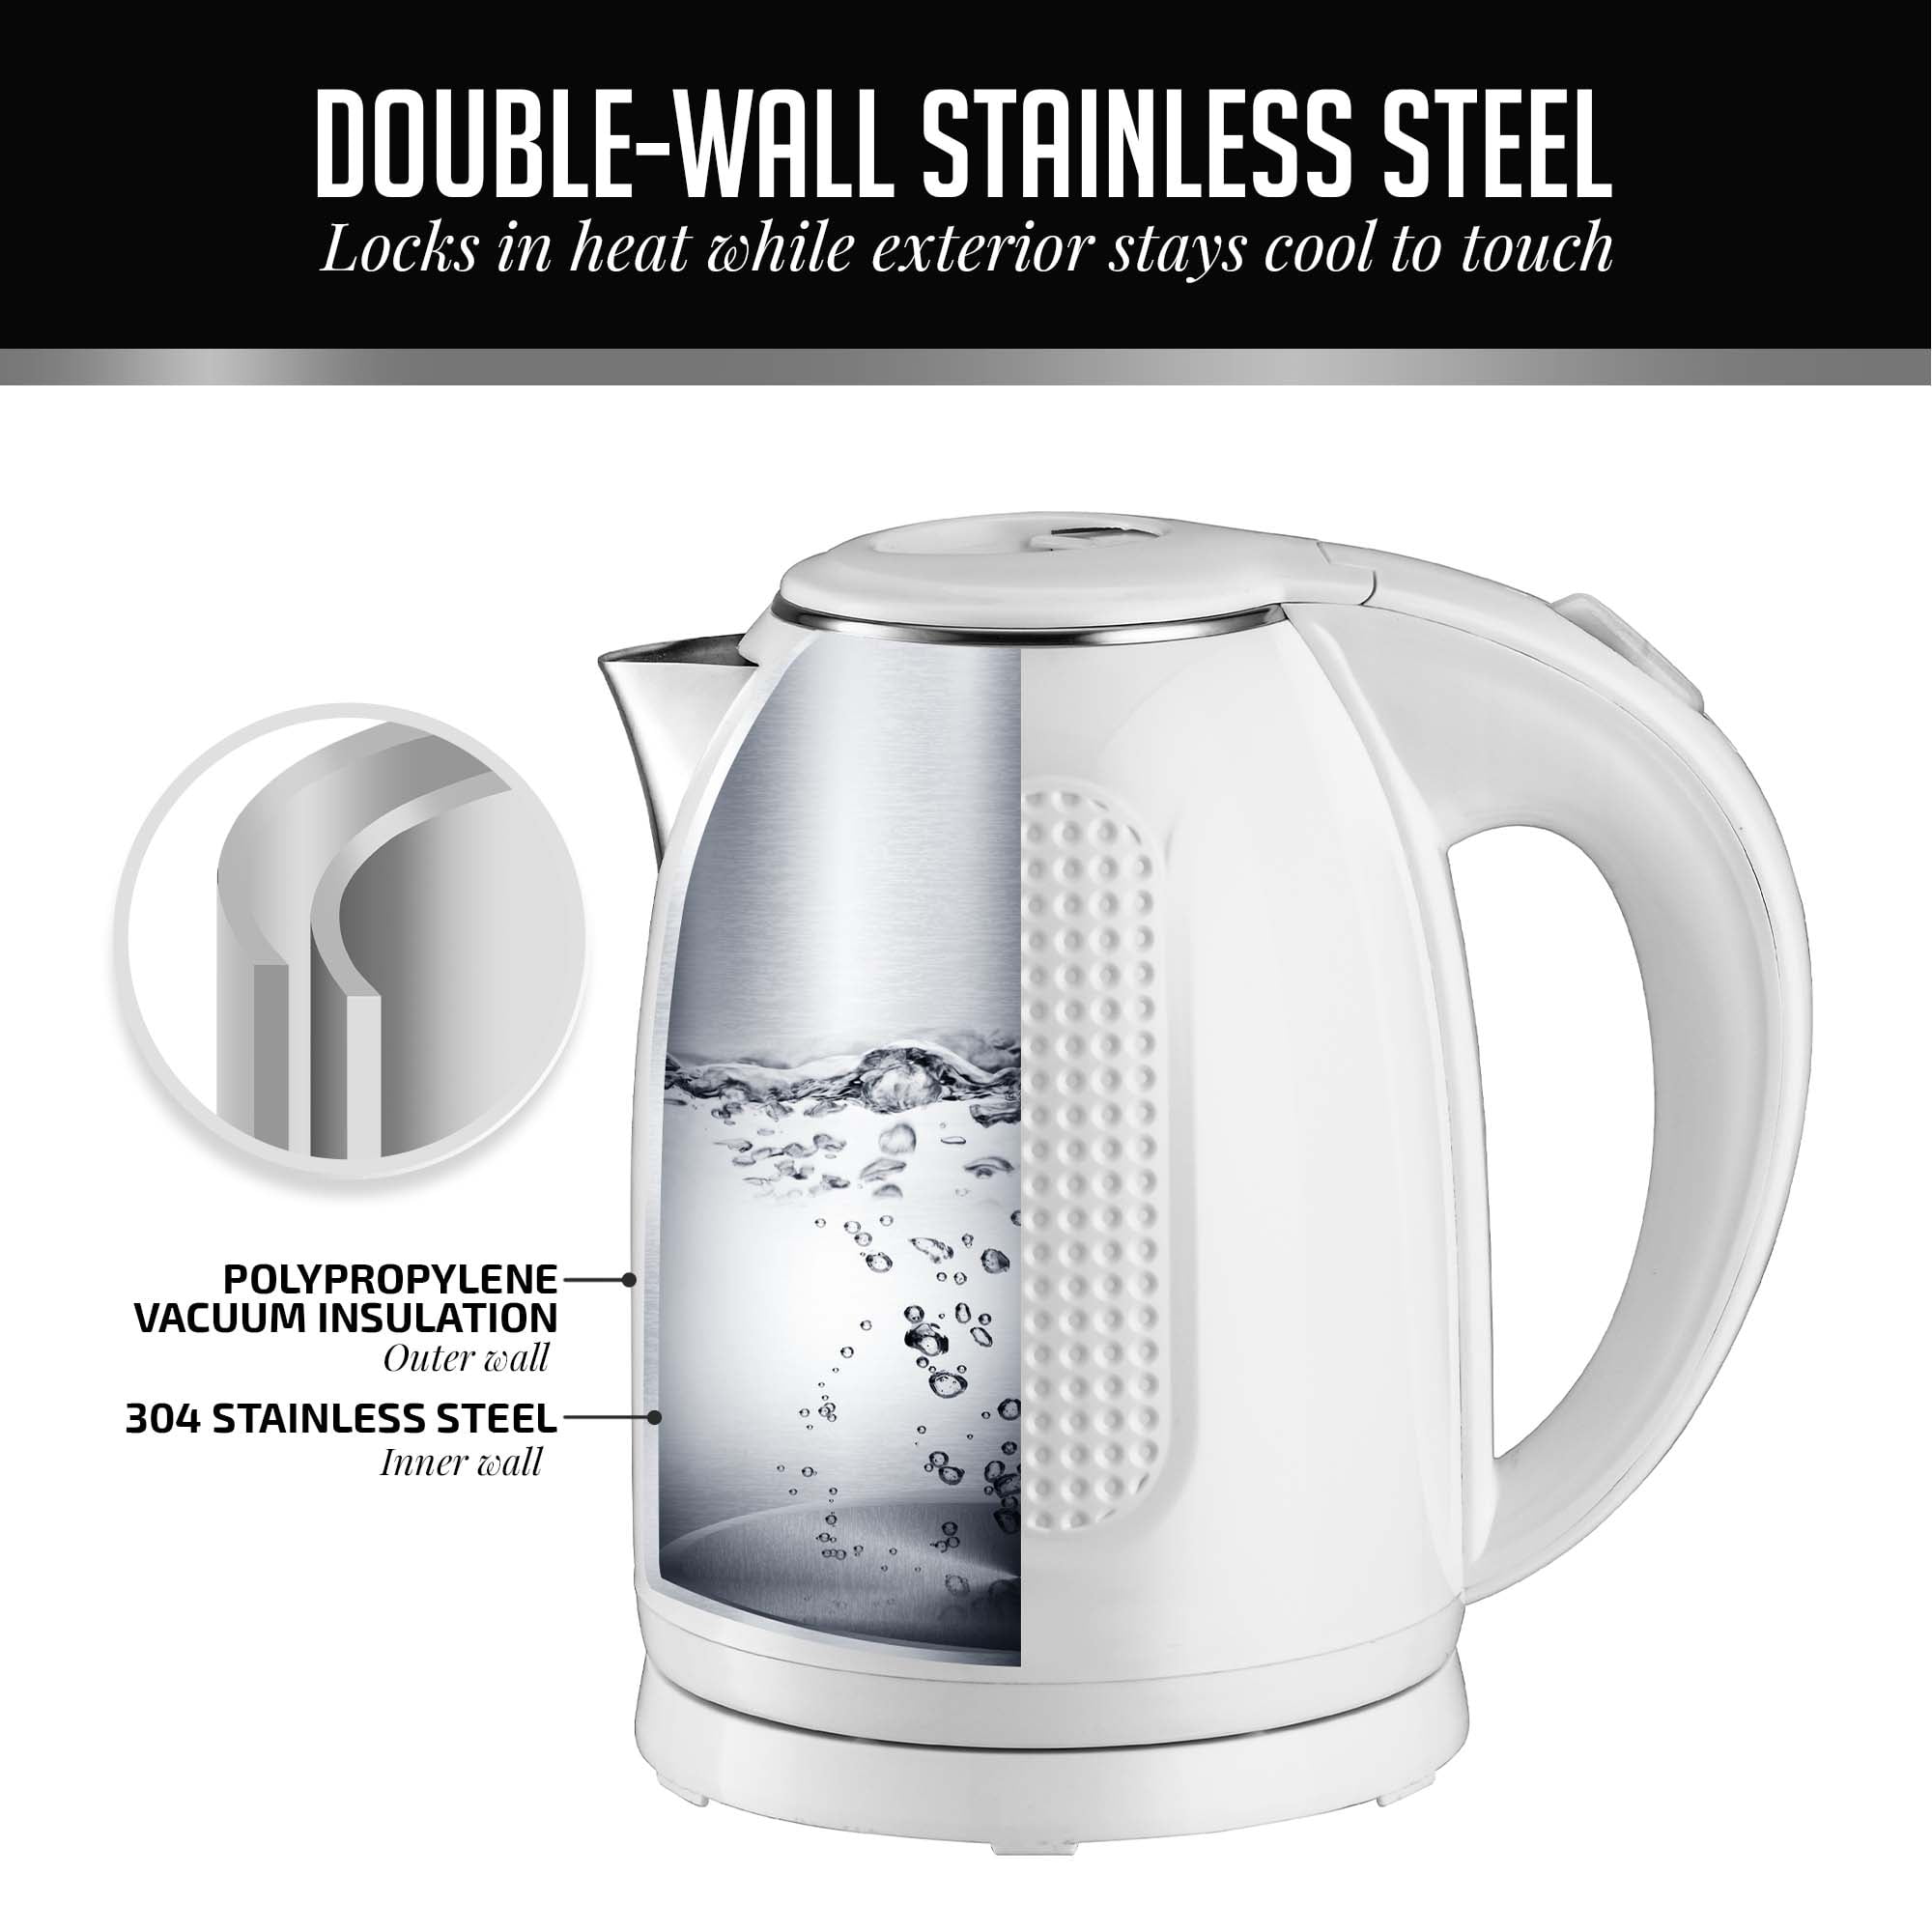 OVENTE Electric Stainless Steel Insulated Hot Water Boiler and Warmer 3.2  Liter, 700 Watt Water Dispenser Automatic Keep Warm Setting & Boil Dry  Protection, Perfect for Tea or Coffee, White WA32W 